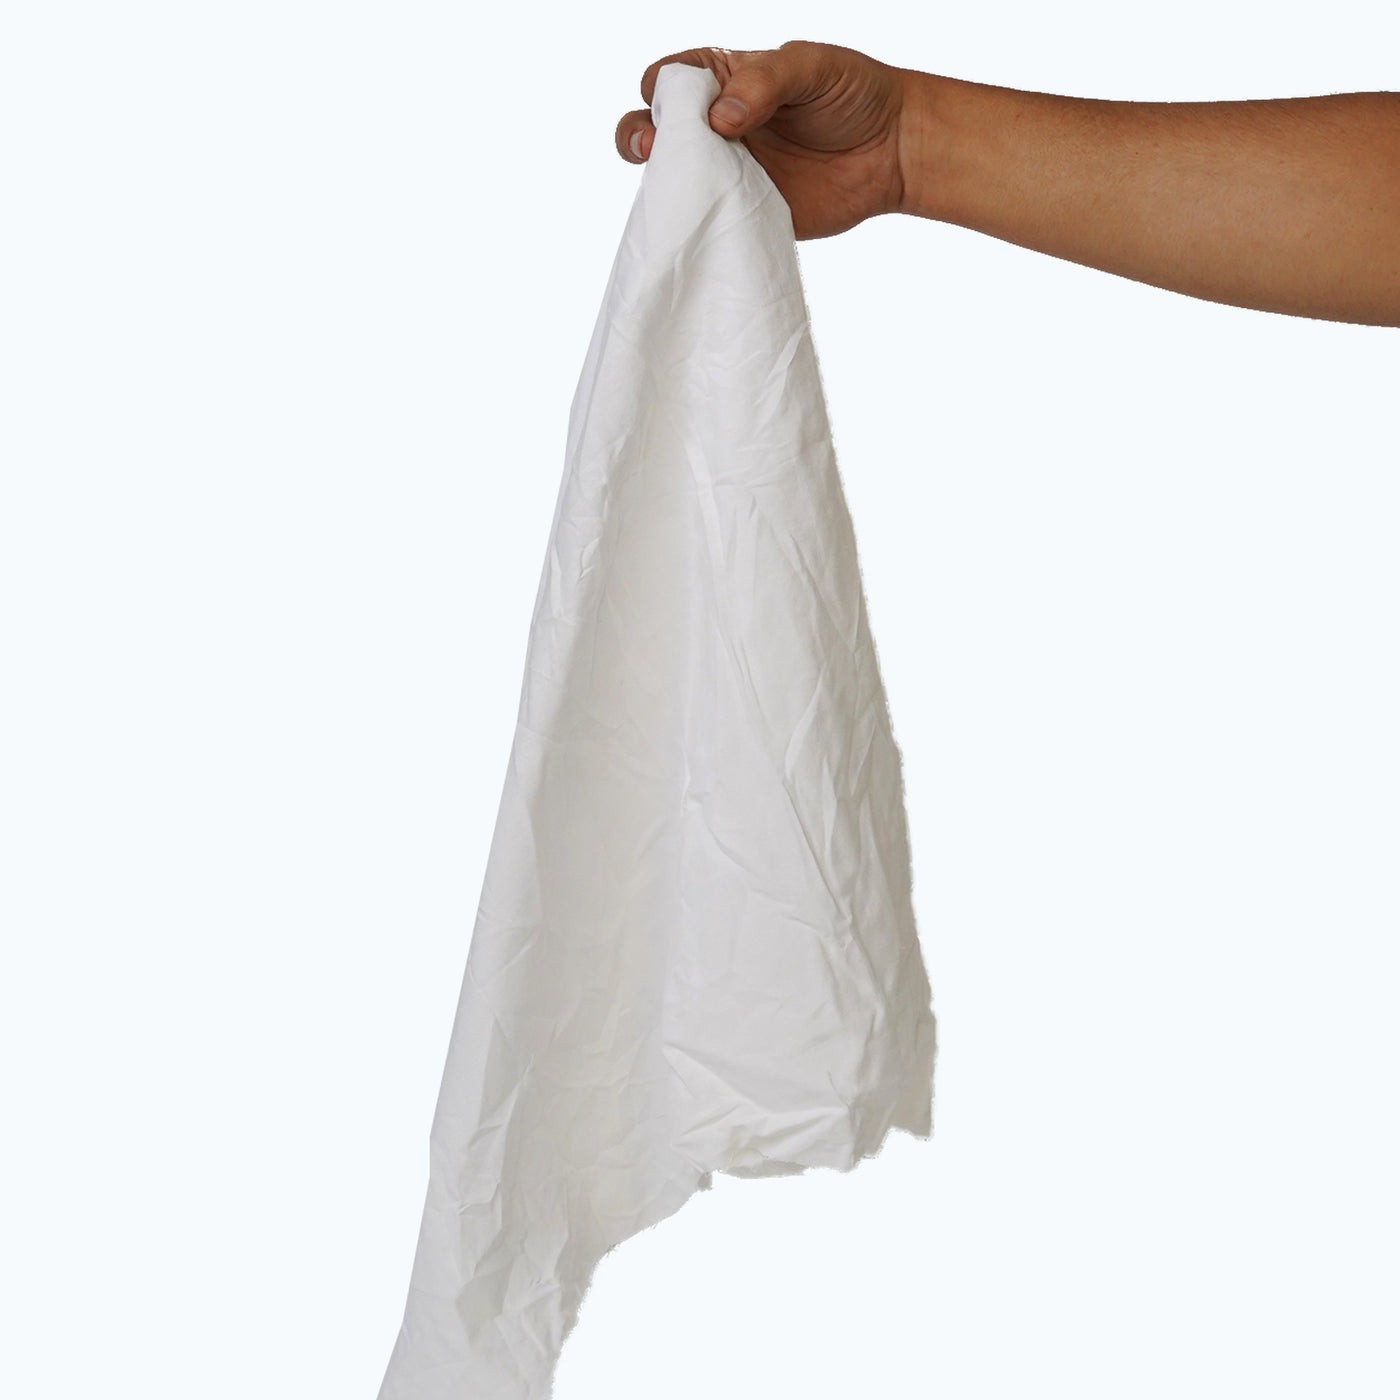 Cut-up White Towels - 20 x 20 - Recycled Rags